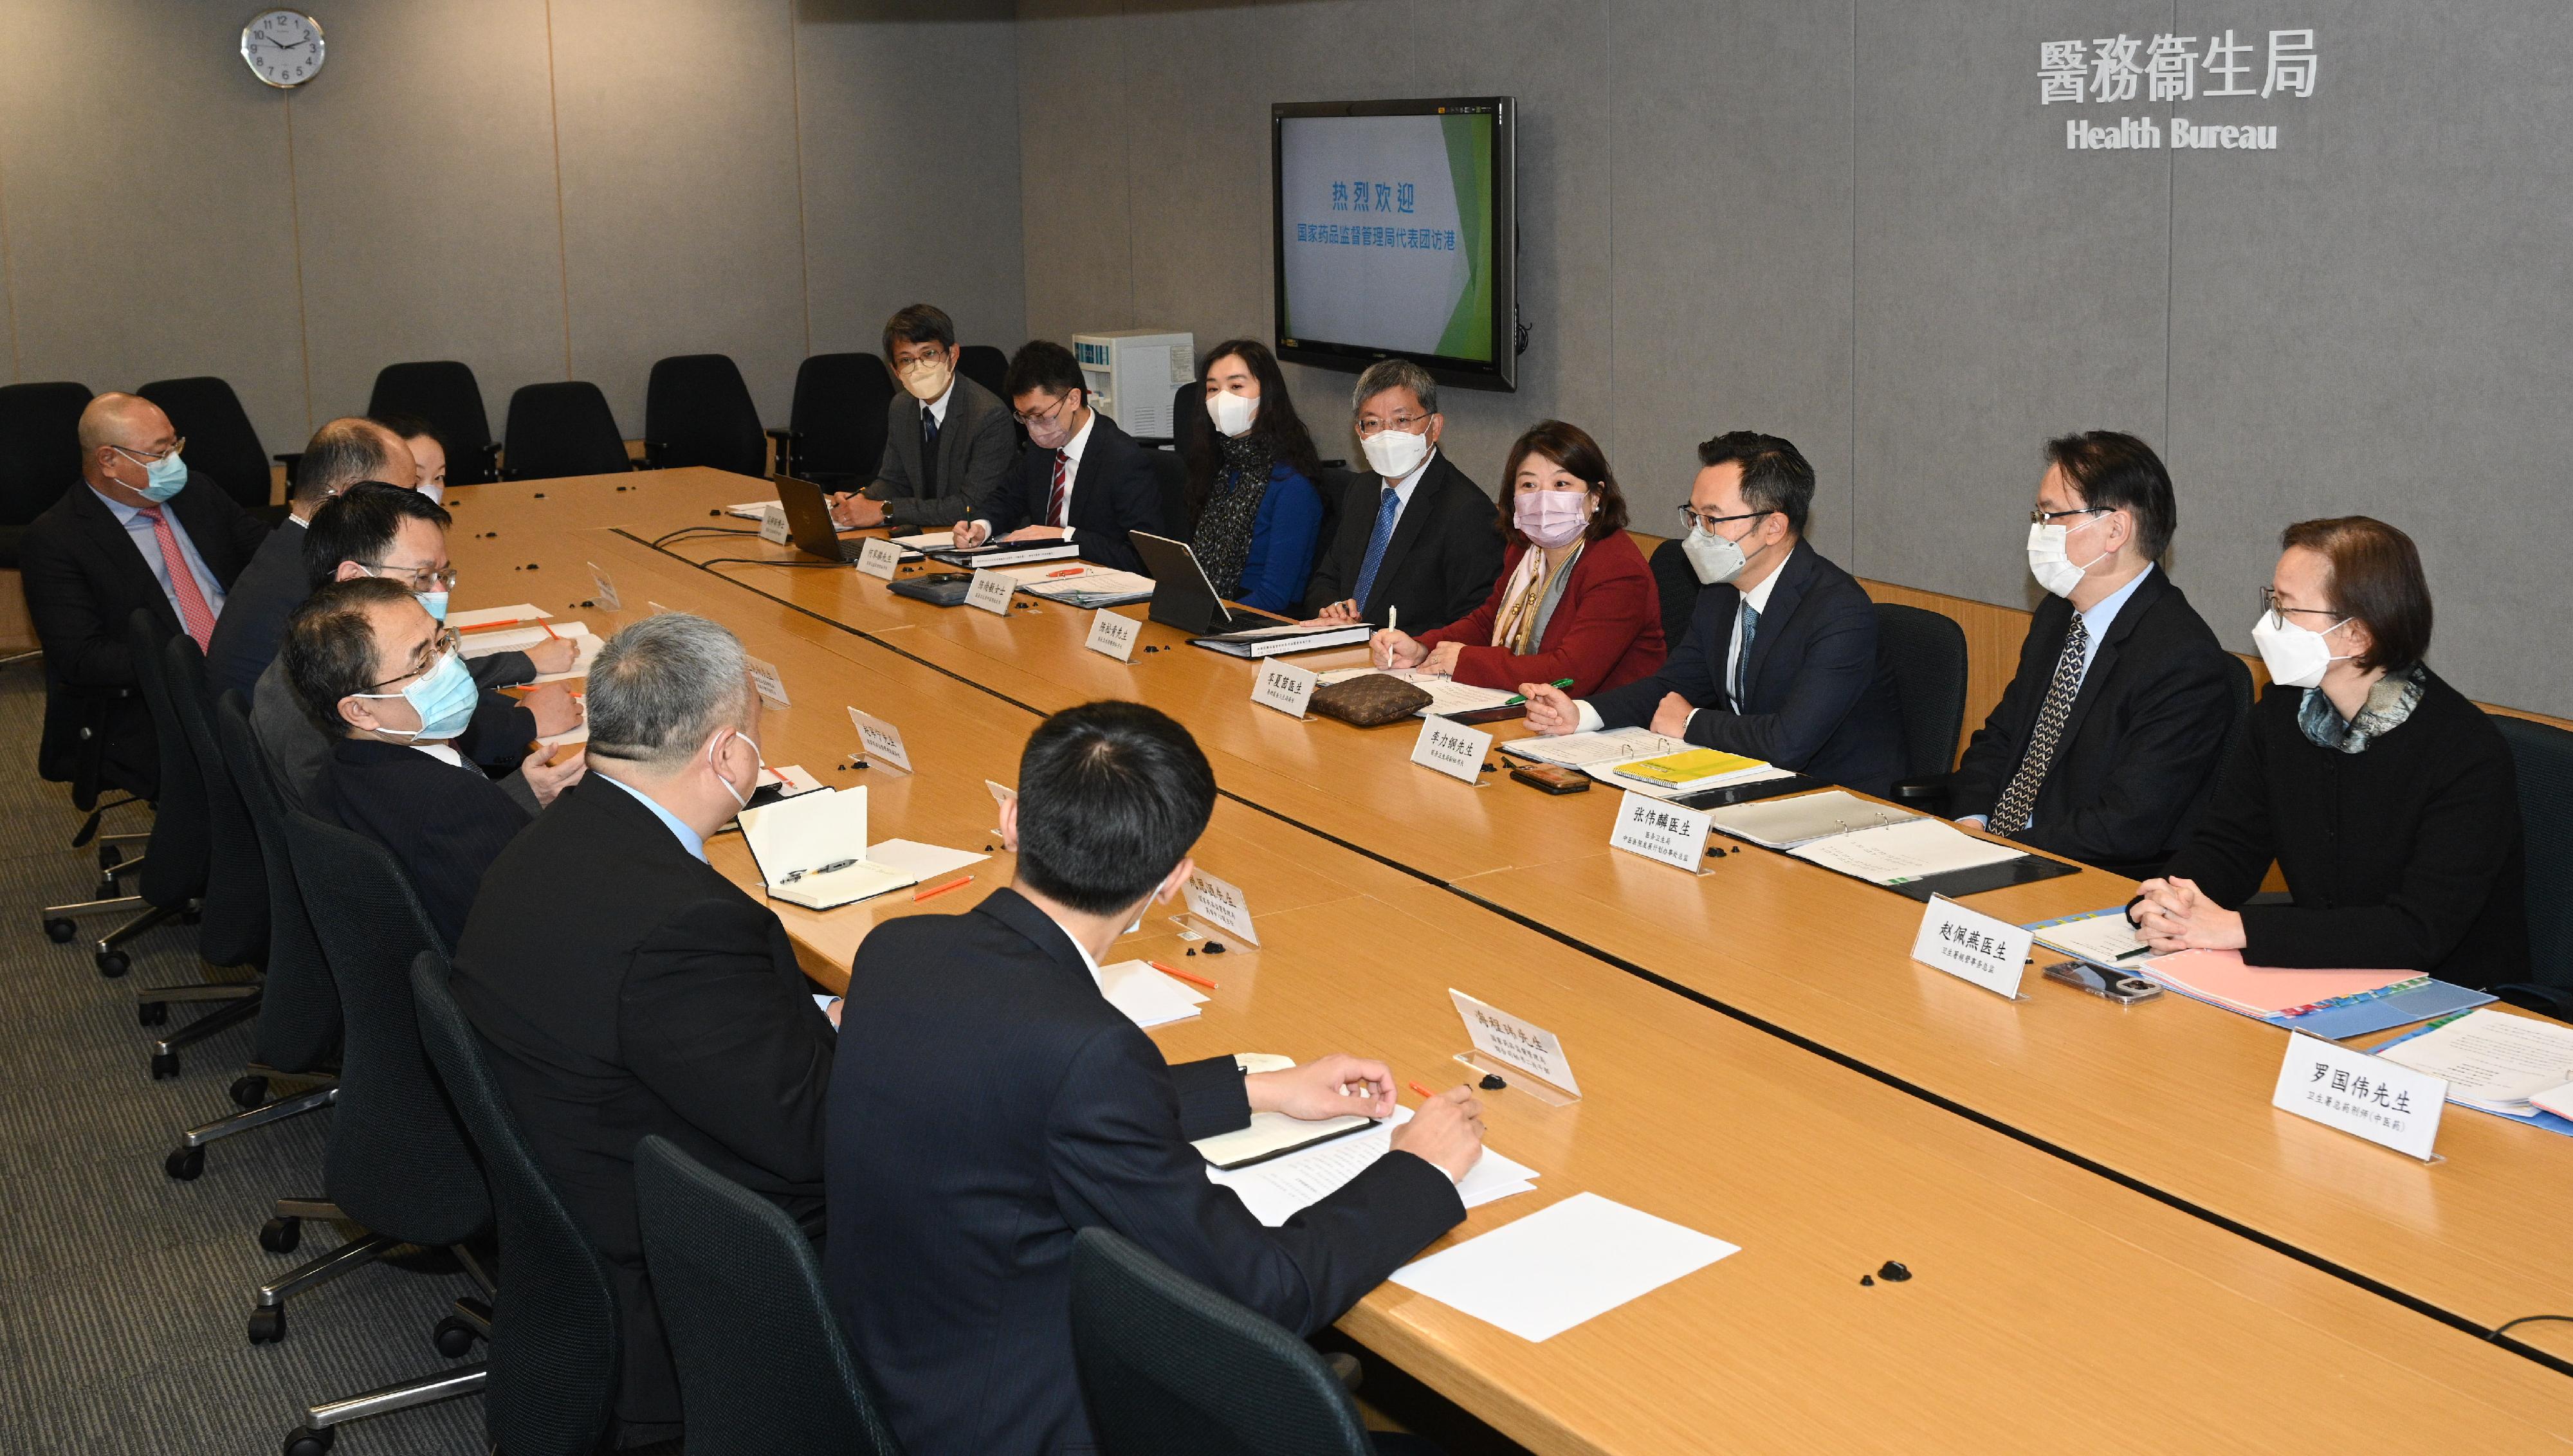 The Acting Secretary for Health, Dr Libby Lee (fourth right), and officers from the Health Bureau met with a delegation of the National Medical Products Administration led by its Member of the Leading Party Members Group and Deputy Commissioner Mr Zhao Junning (fourth left) at the Central Government Offices today (February 13).